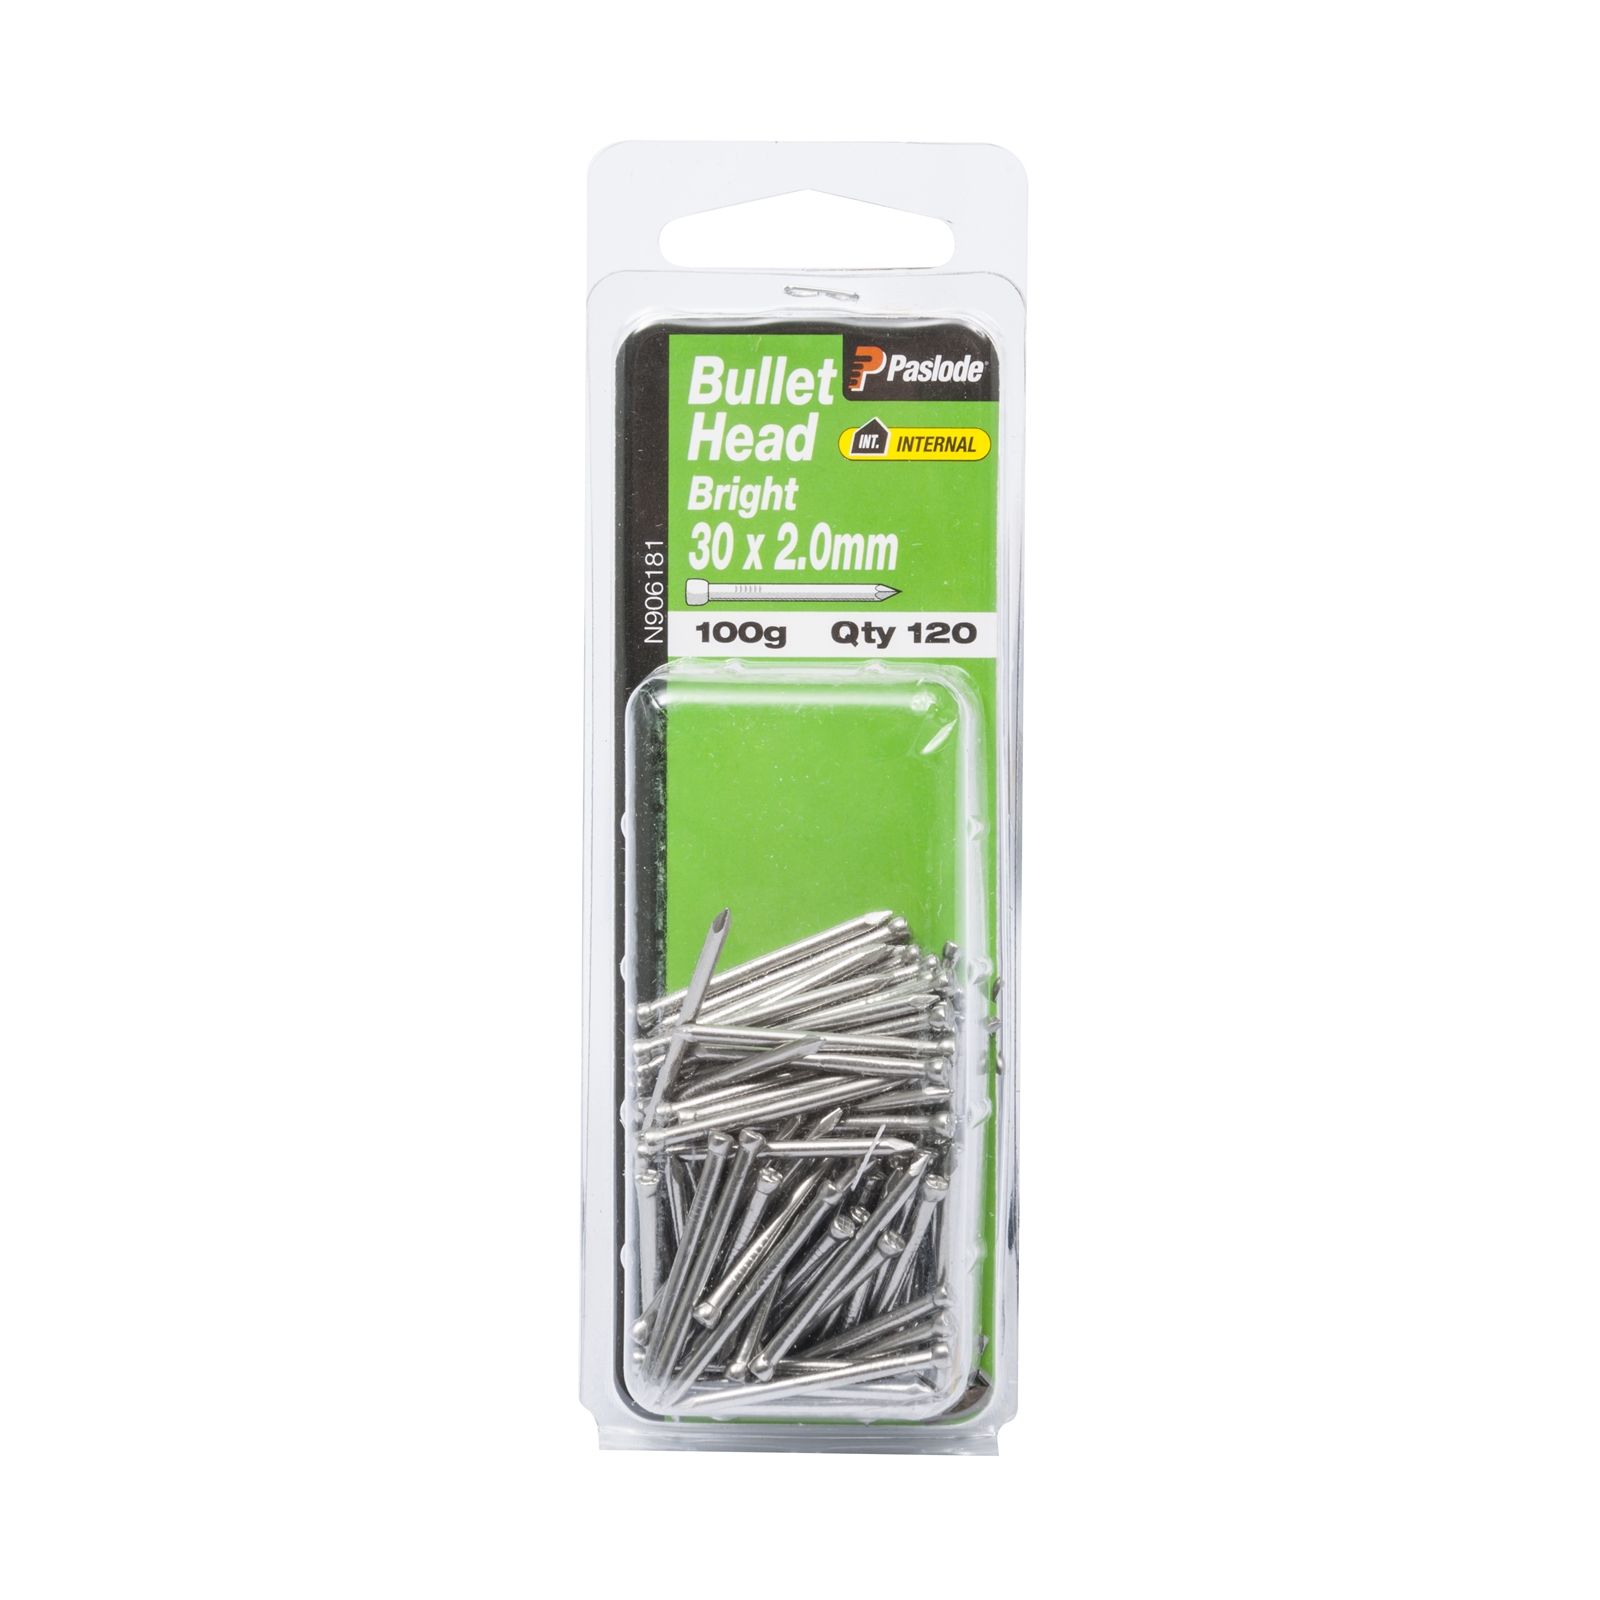 Paslode 30 x 2.0mm 100g Bright Steel Bullet Head Nails - 120 Pack